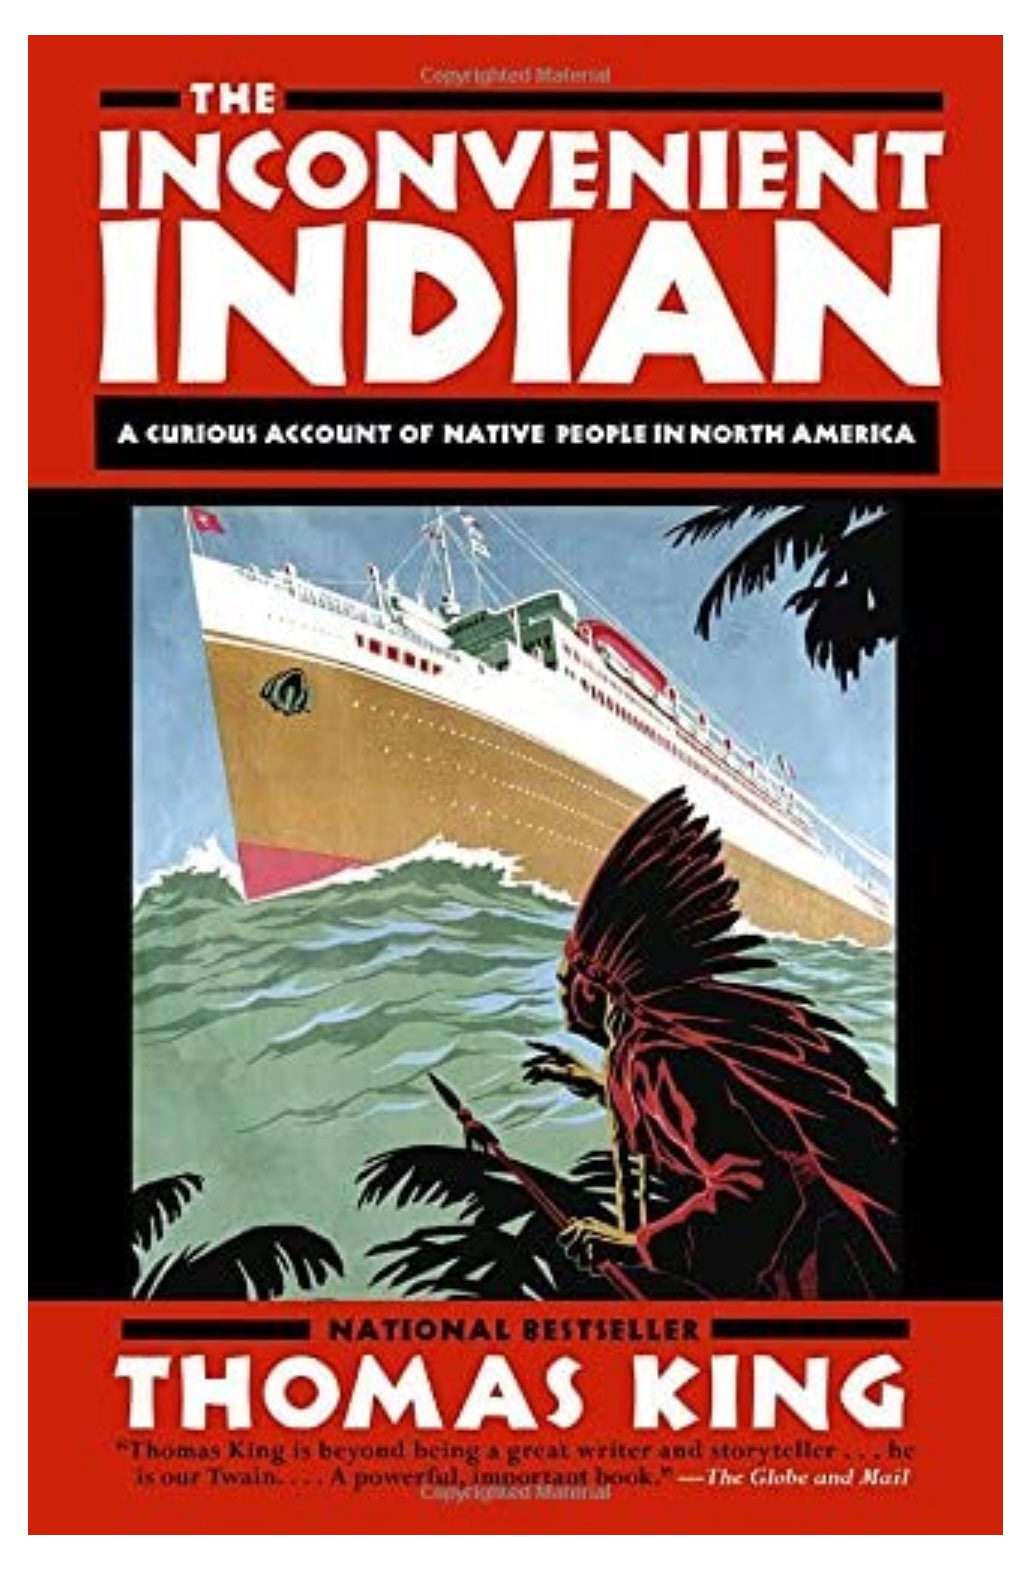 The Inconvenient Indian. A curious account of Native People in North America